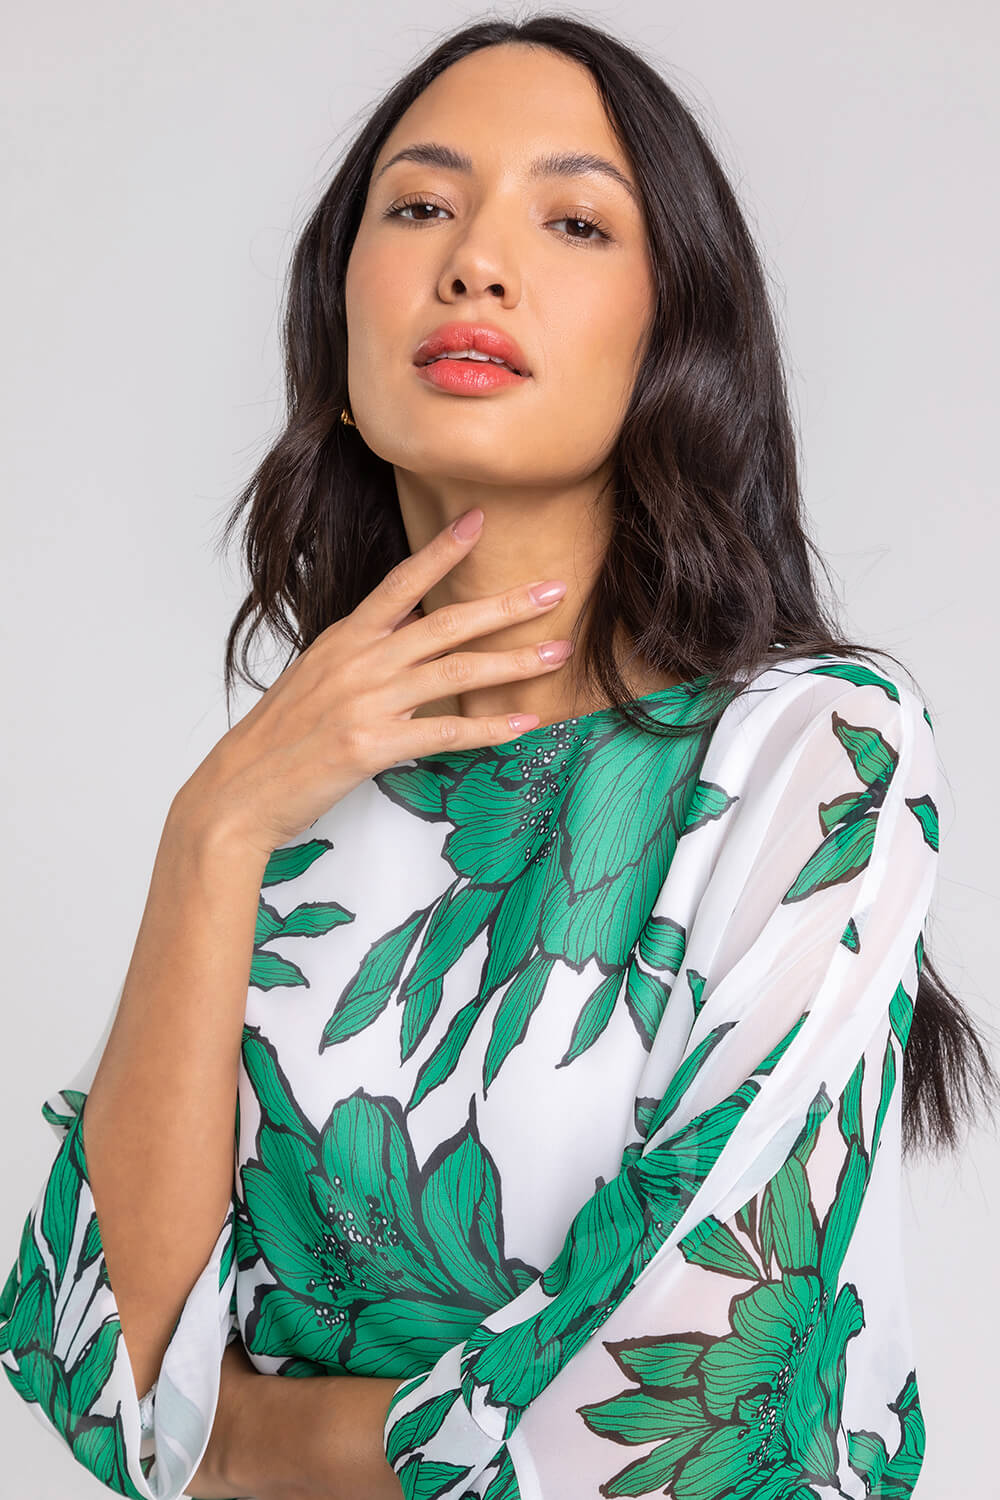 Green Floral Print Chiffon Overlay Top, Image 5 of 5